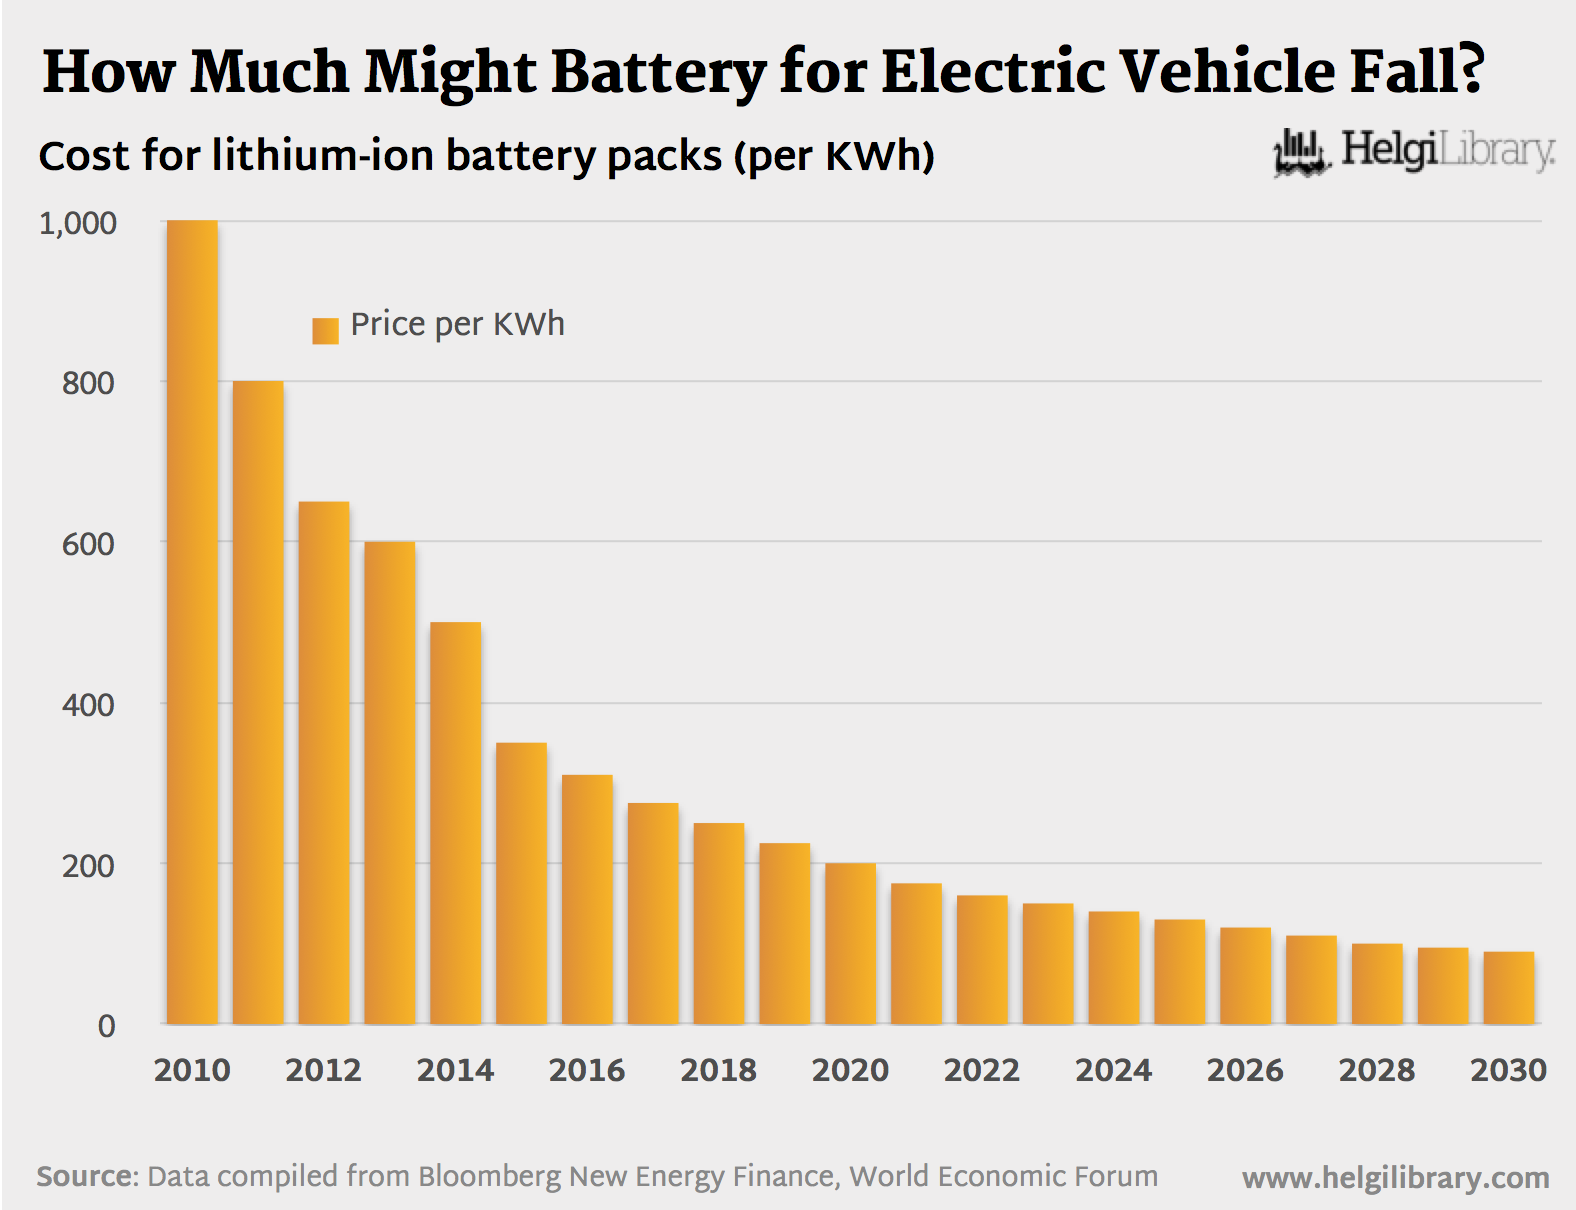 How Much Might Battery for Electric Vehicle Fall? Helgi Library